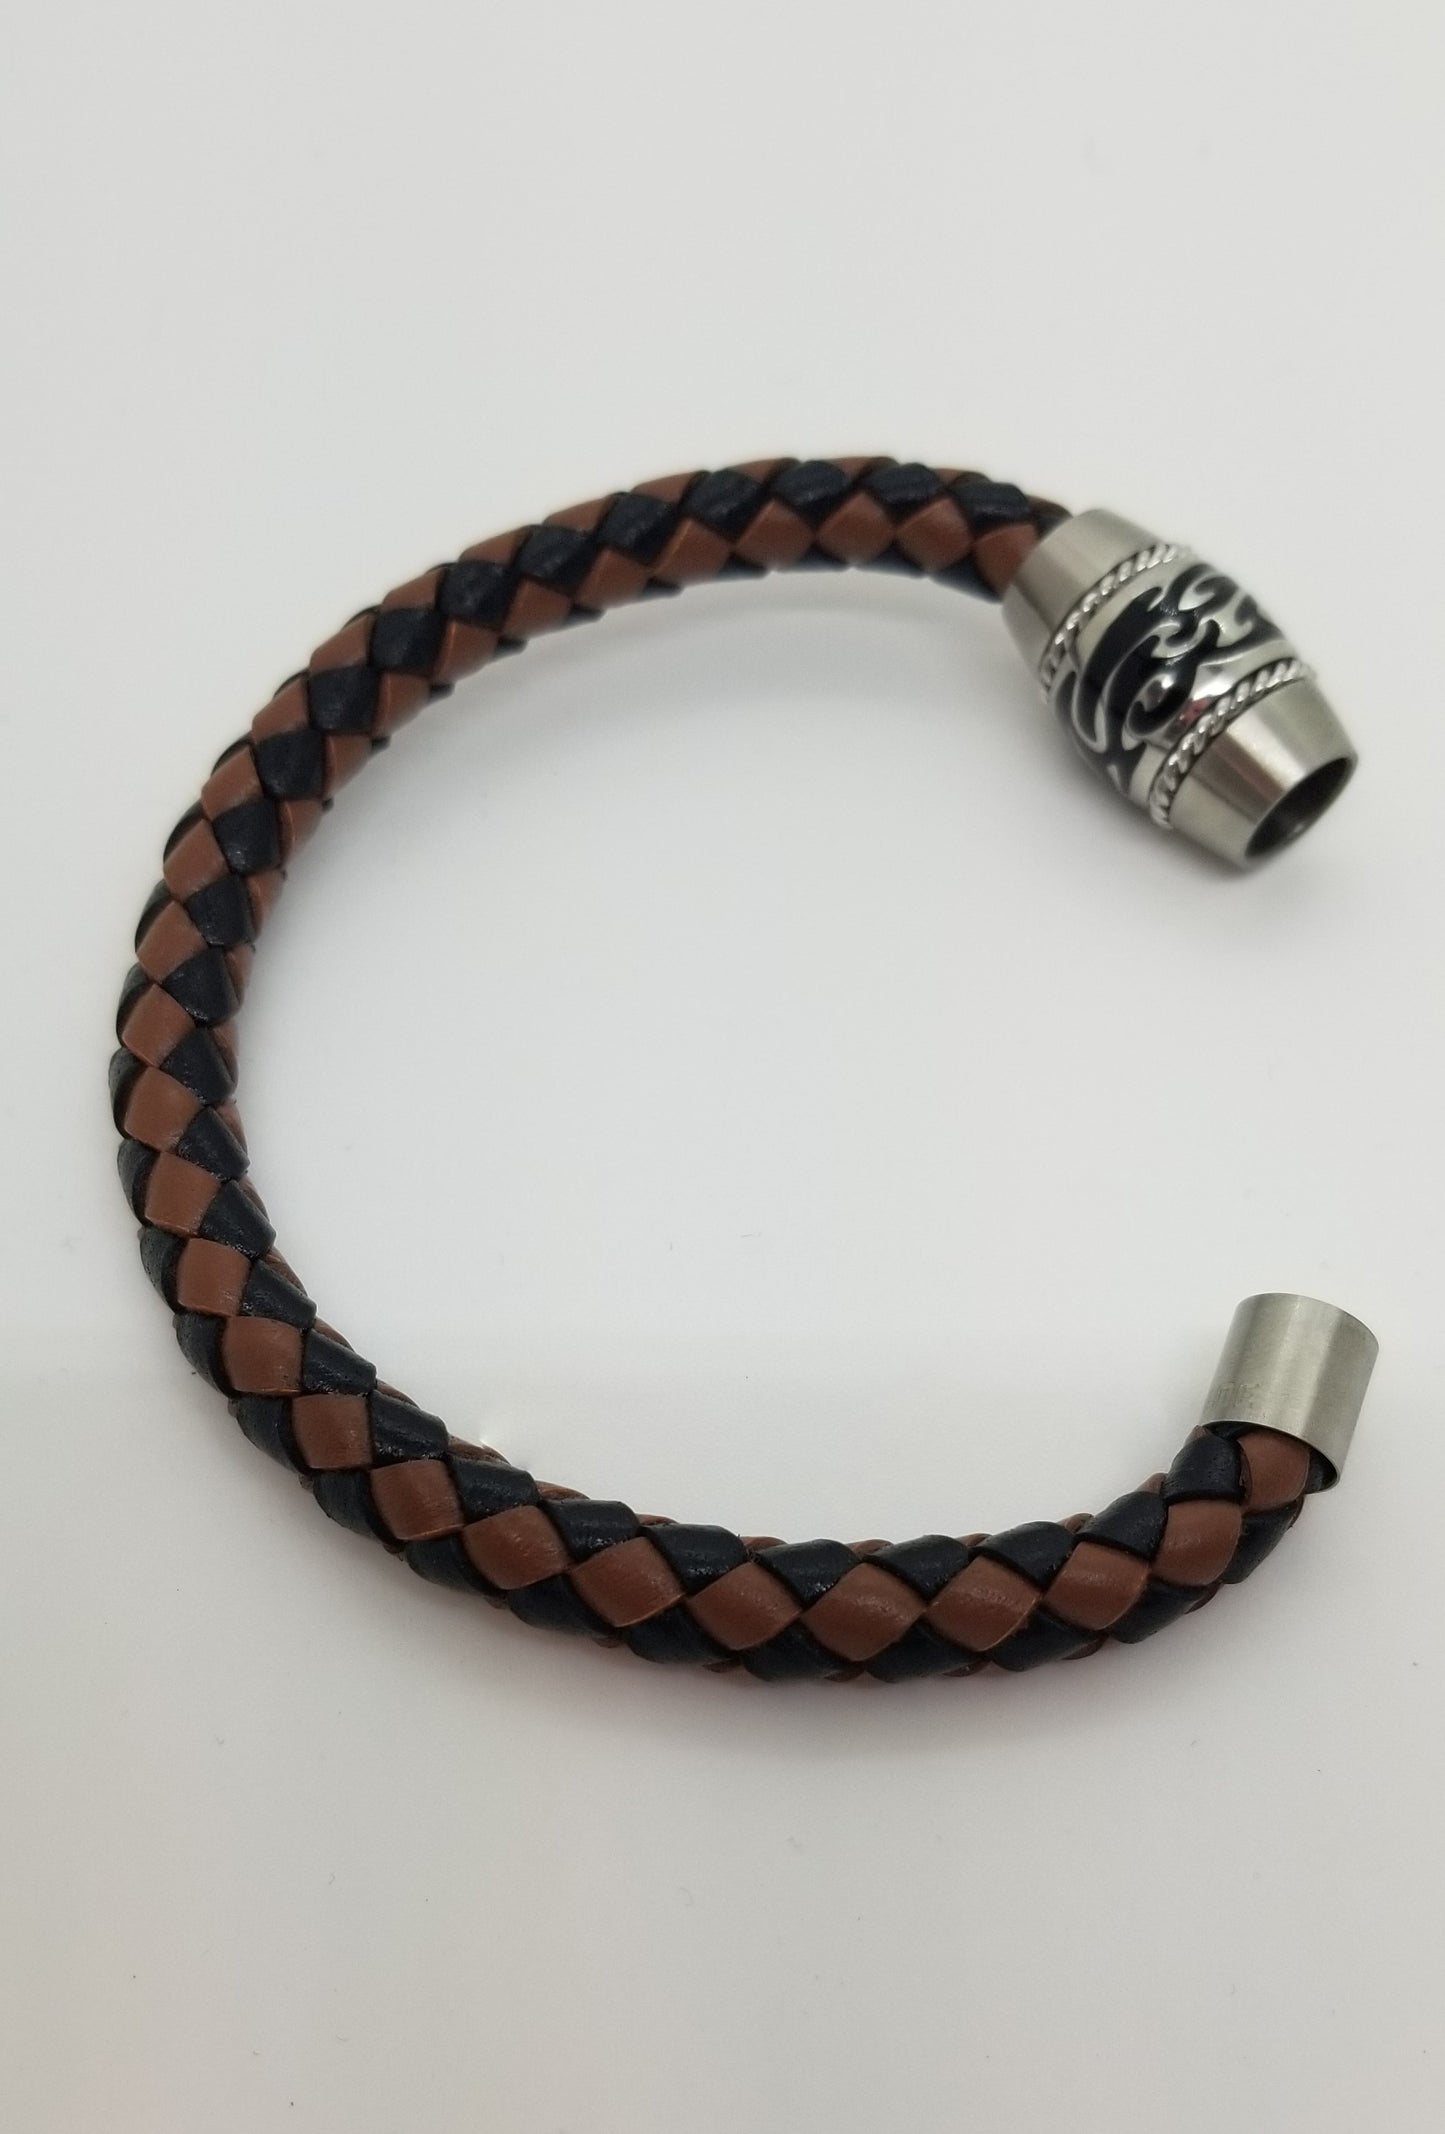 Genuine leather stainless steel magnetic clasp bracelet